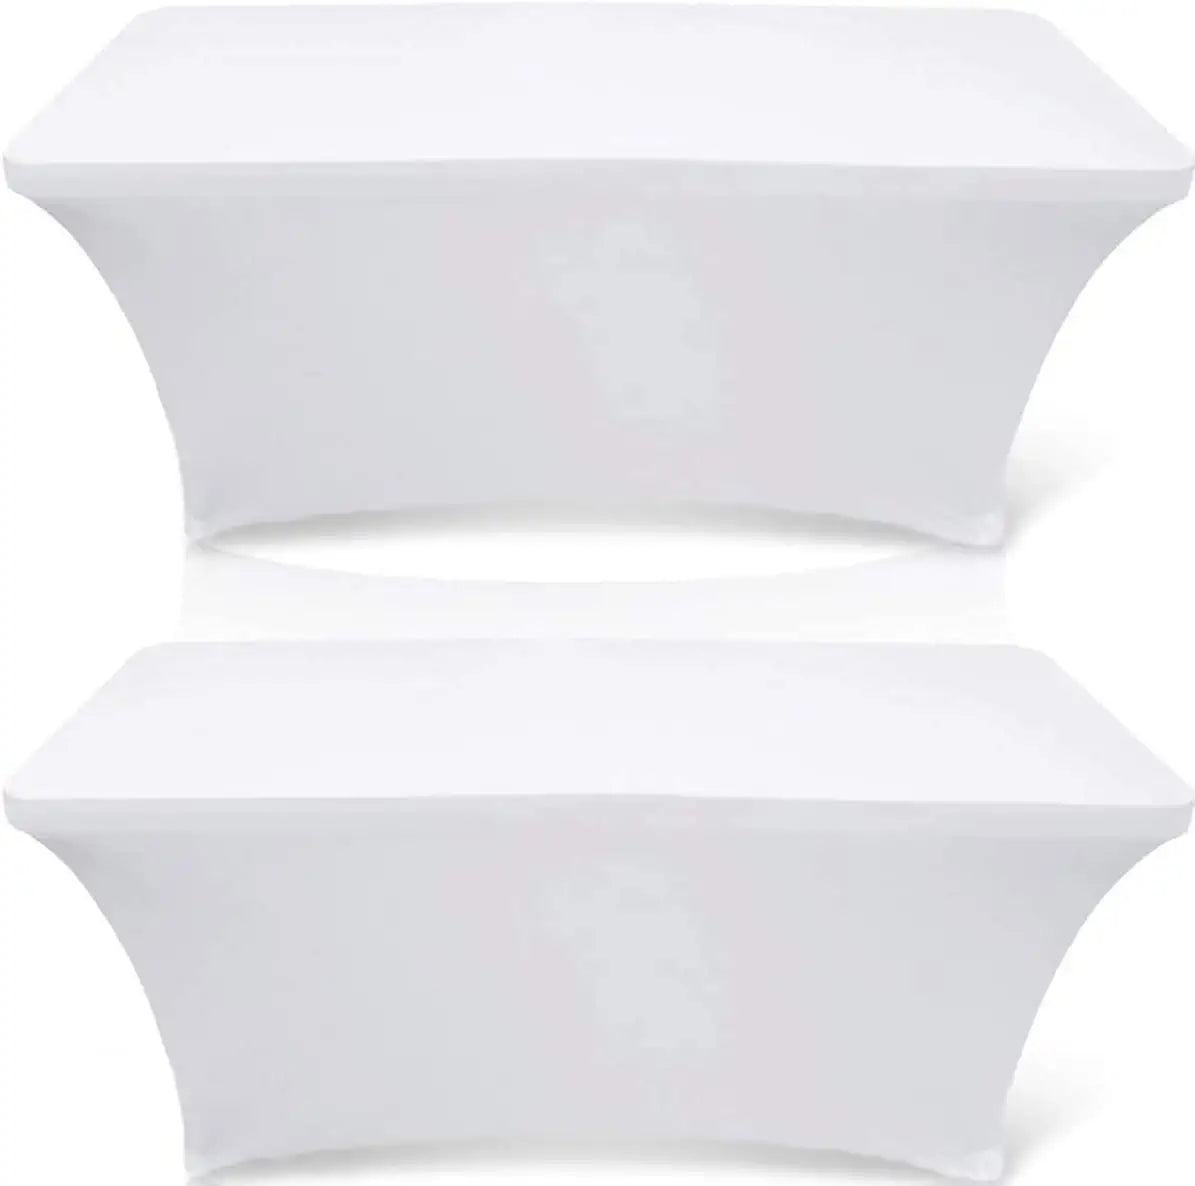 Stretchable Fabric tablecloths